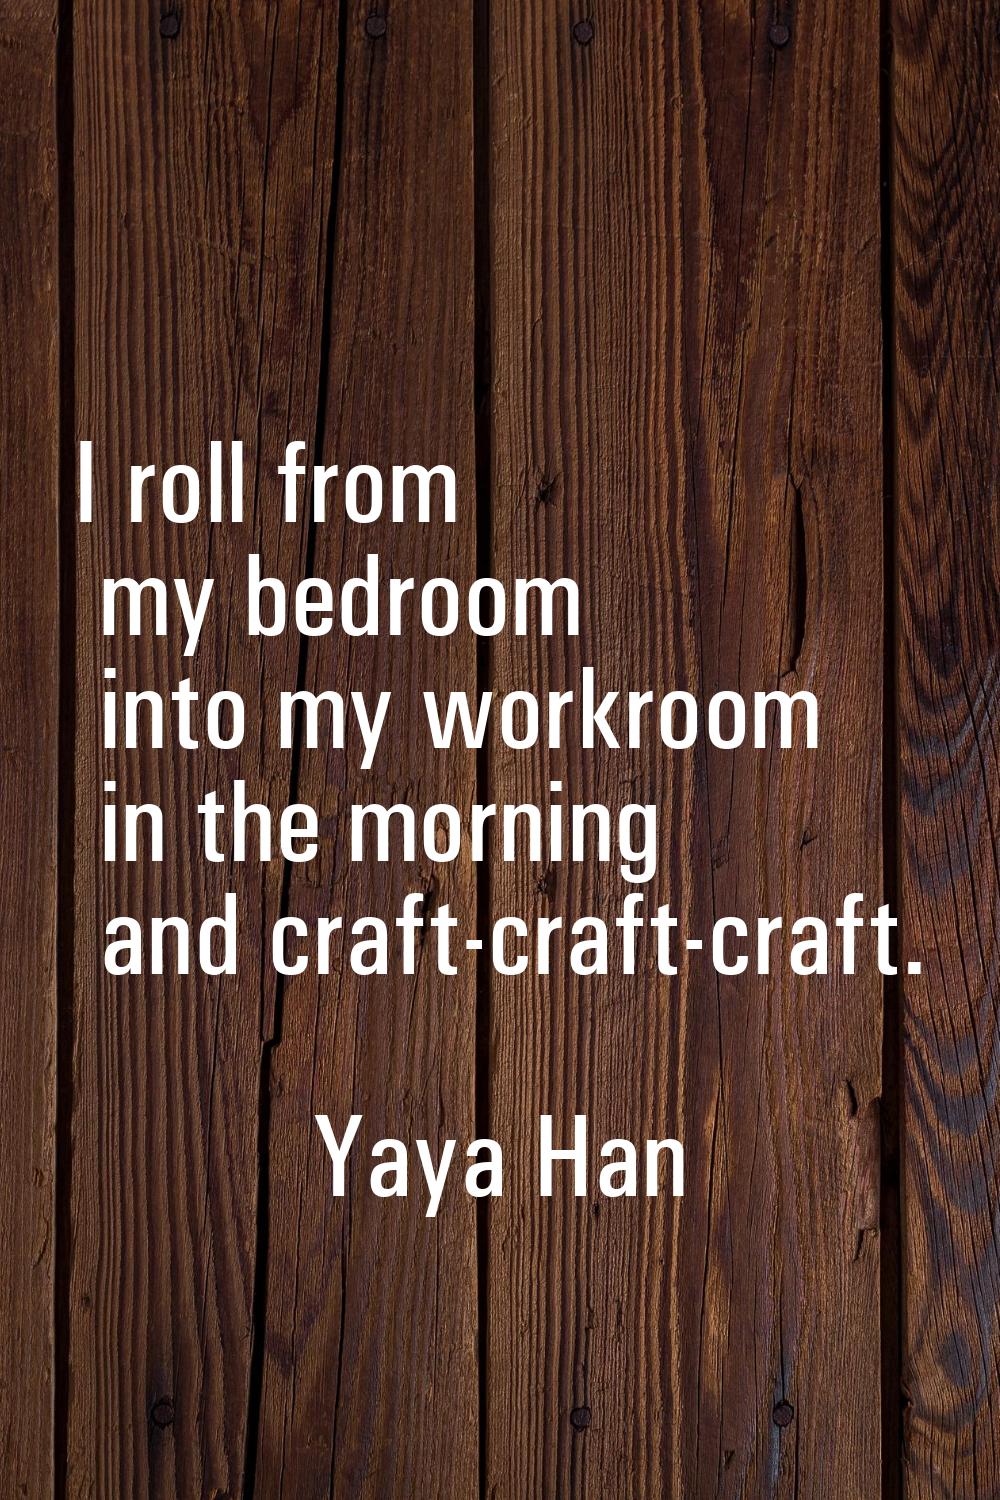 I roll from my bedroom into my workroom in the morning and craft-craft-craft.